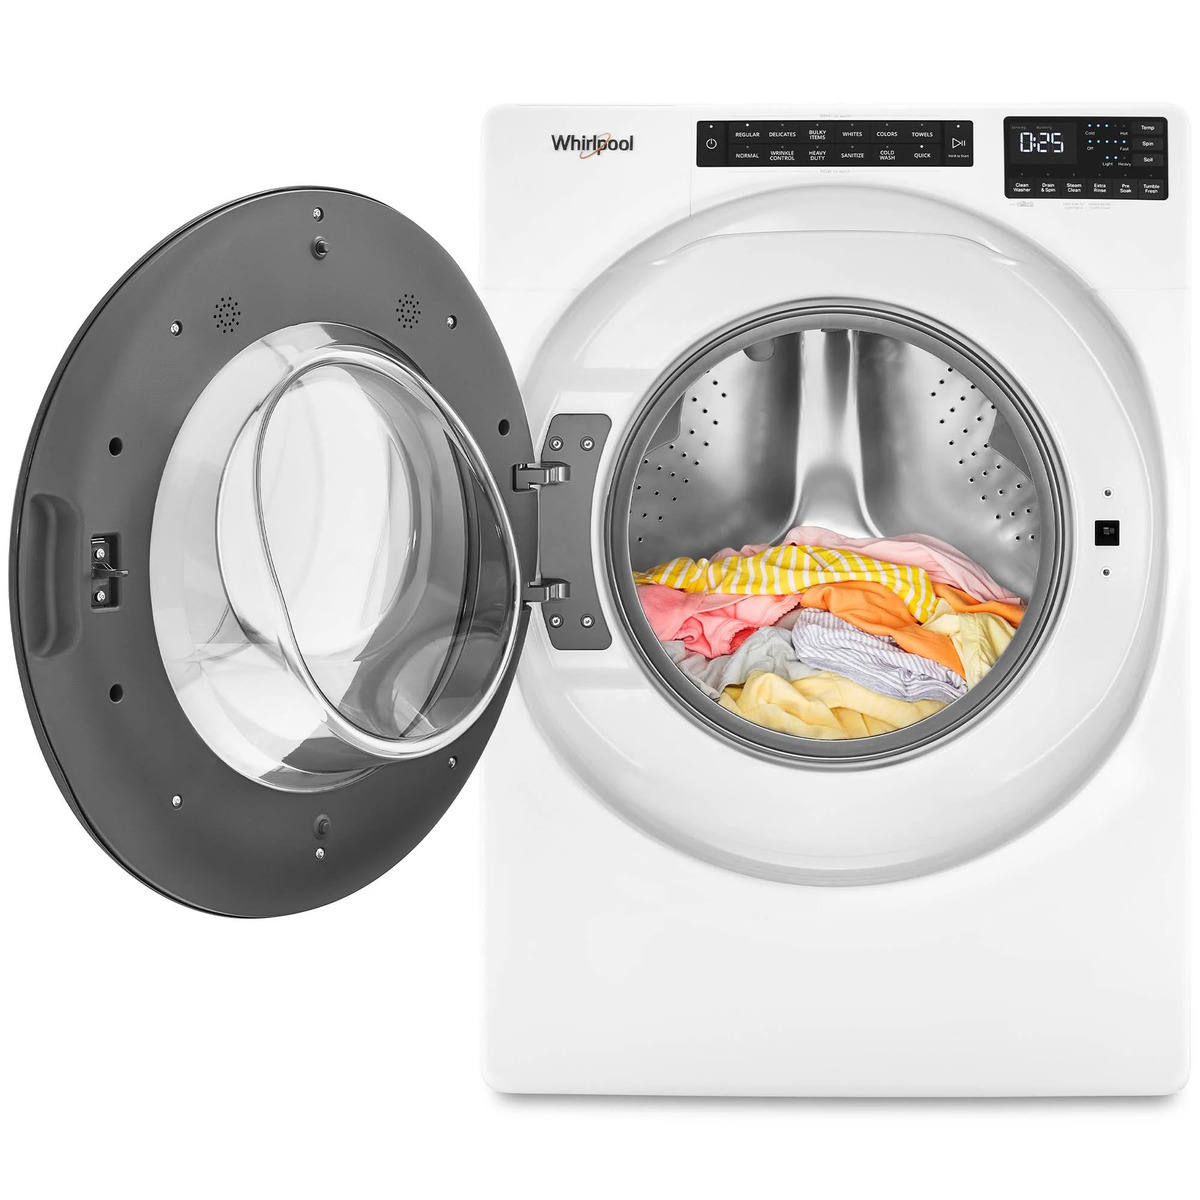 How To Fix The Error Code F57 For Whirlpool Washer